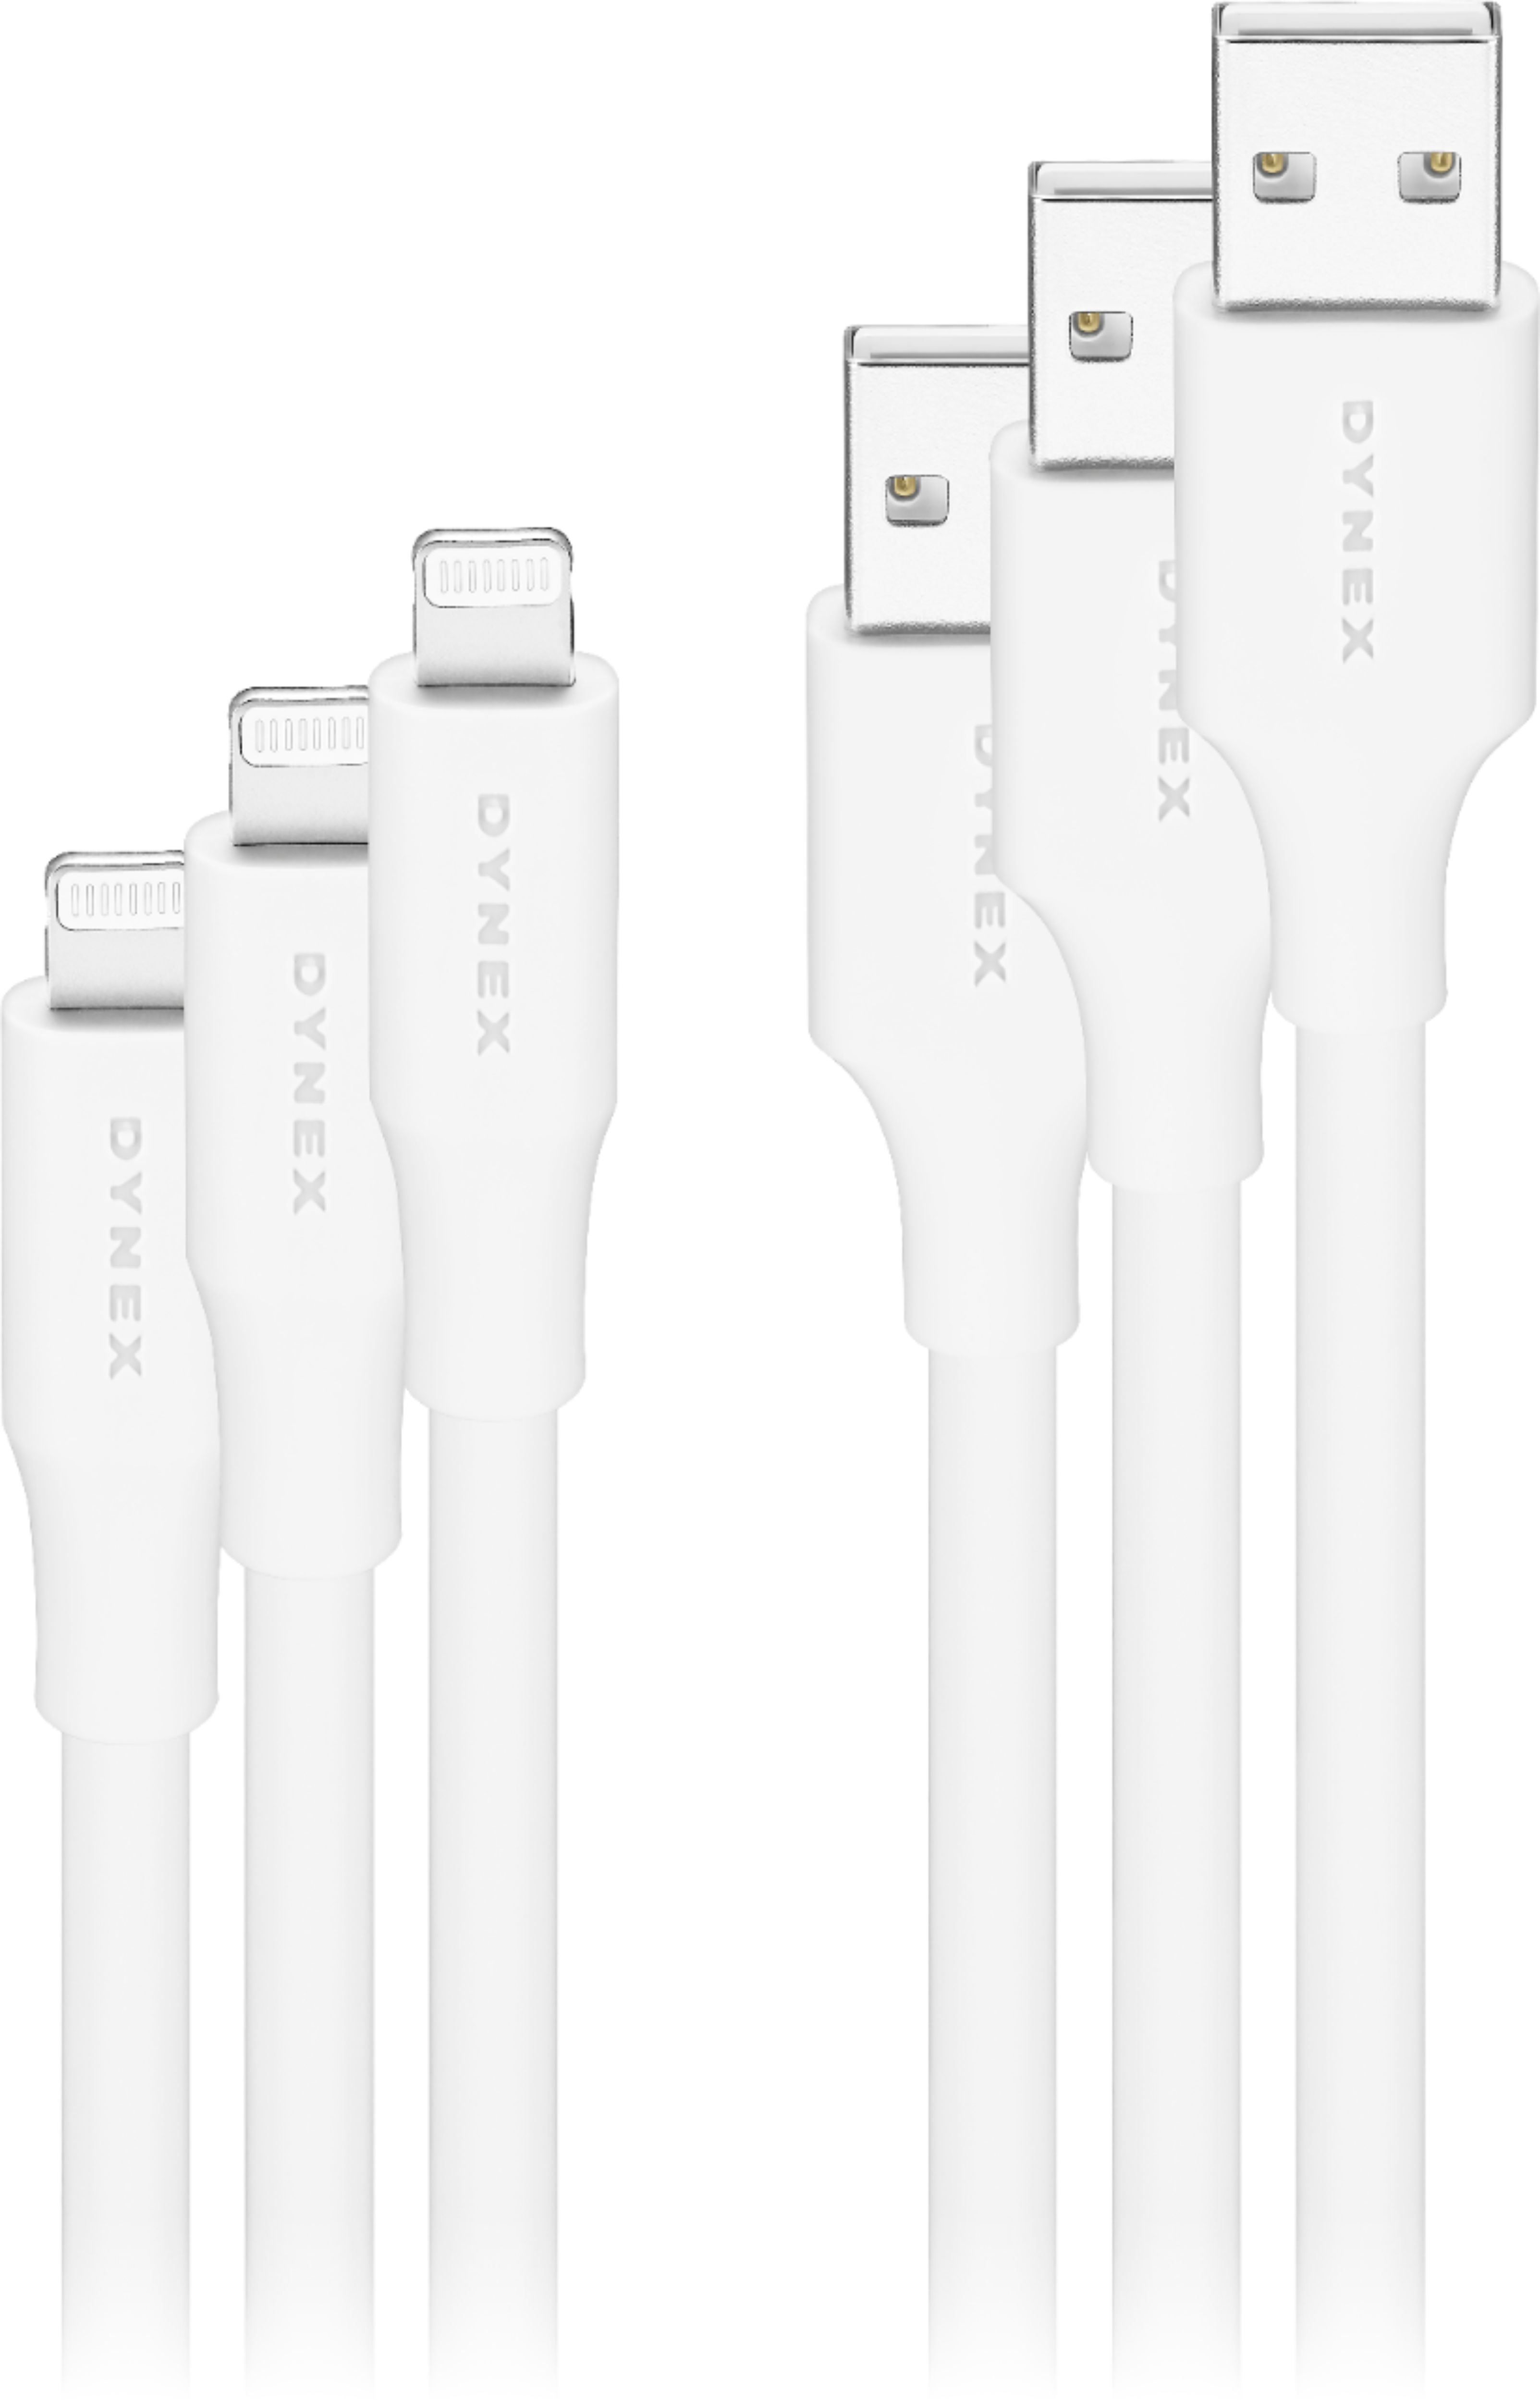 Dynex™ 10' Lightning to USB Charge-and-Sync Cable (3 Pack) White  DX-MLA1021W3 - Best Buy